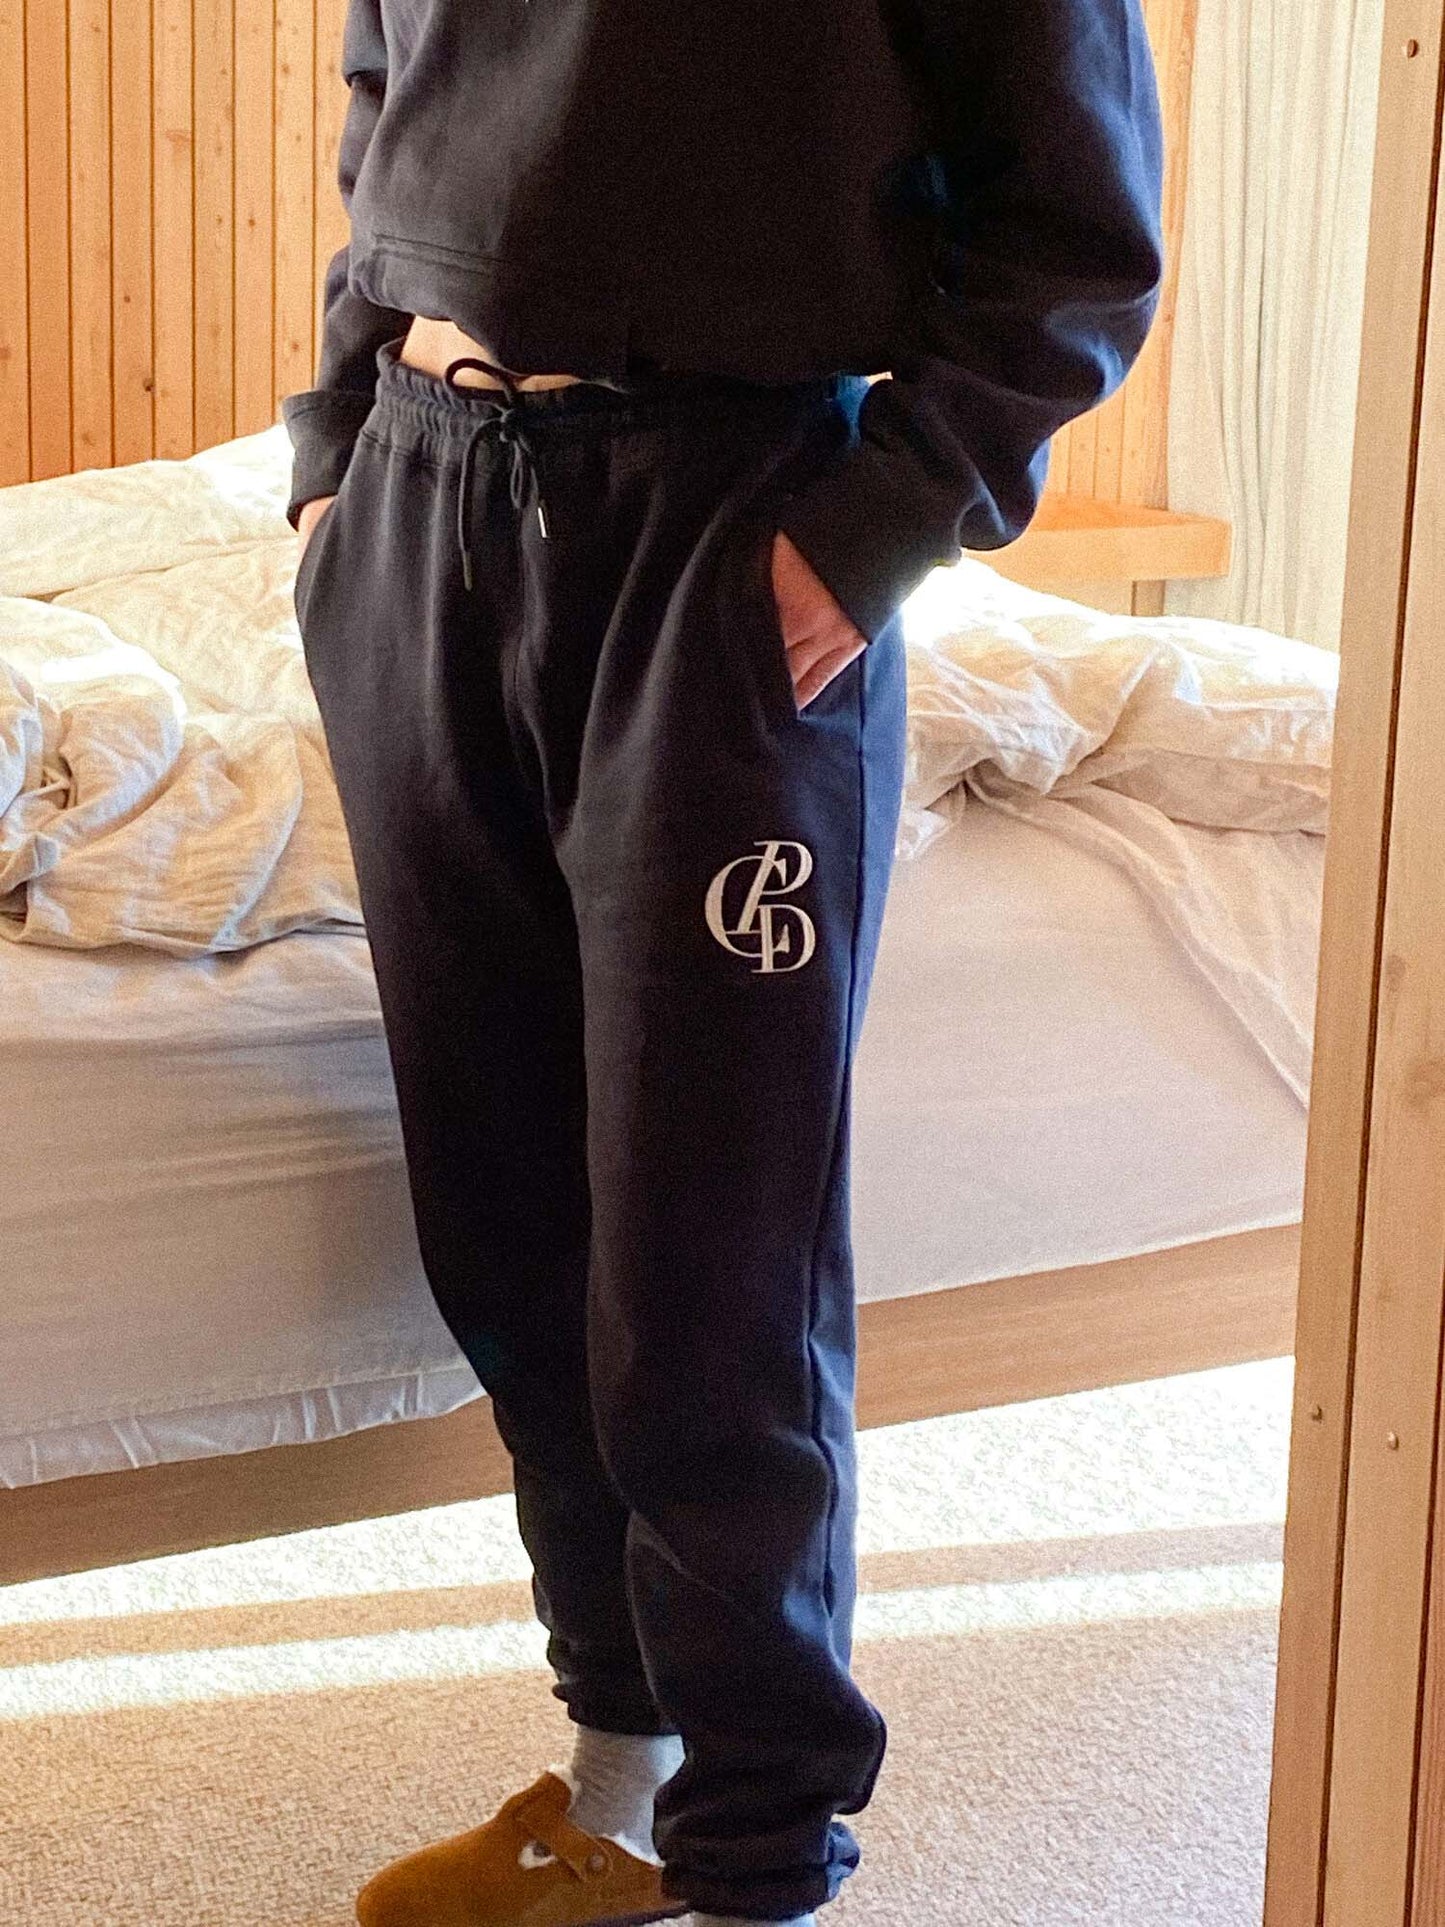 CPD Everybody Trackpant - French Navy